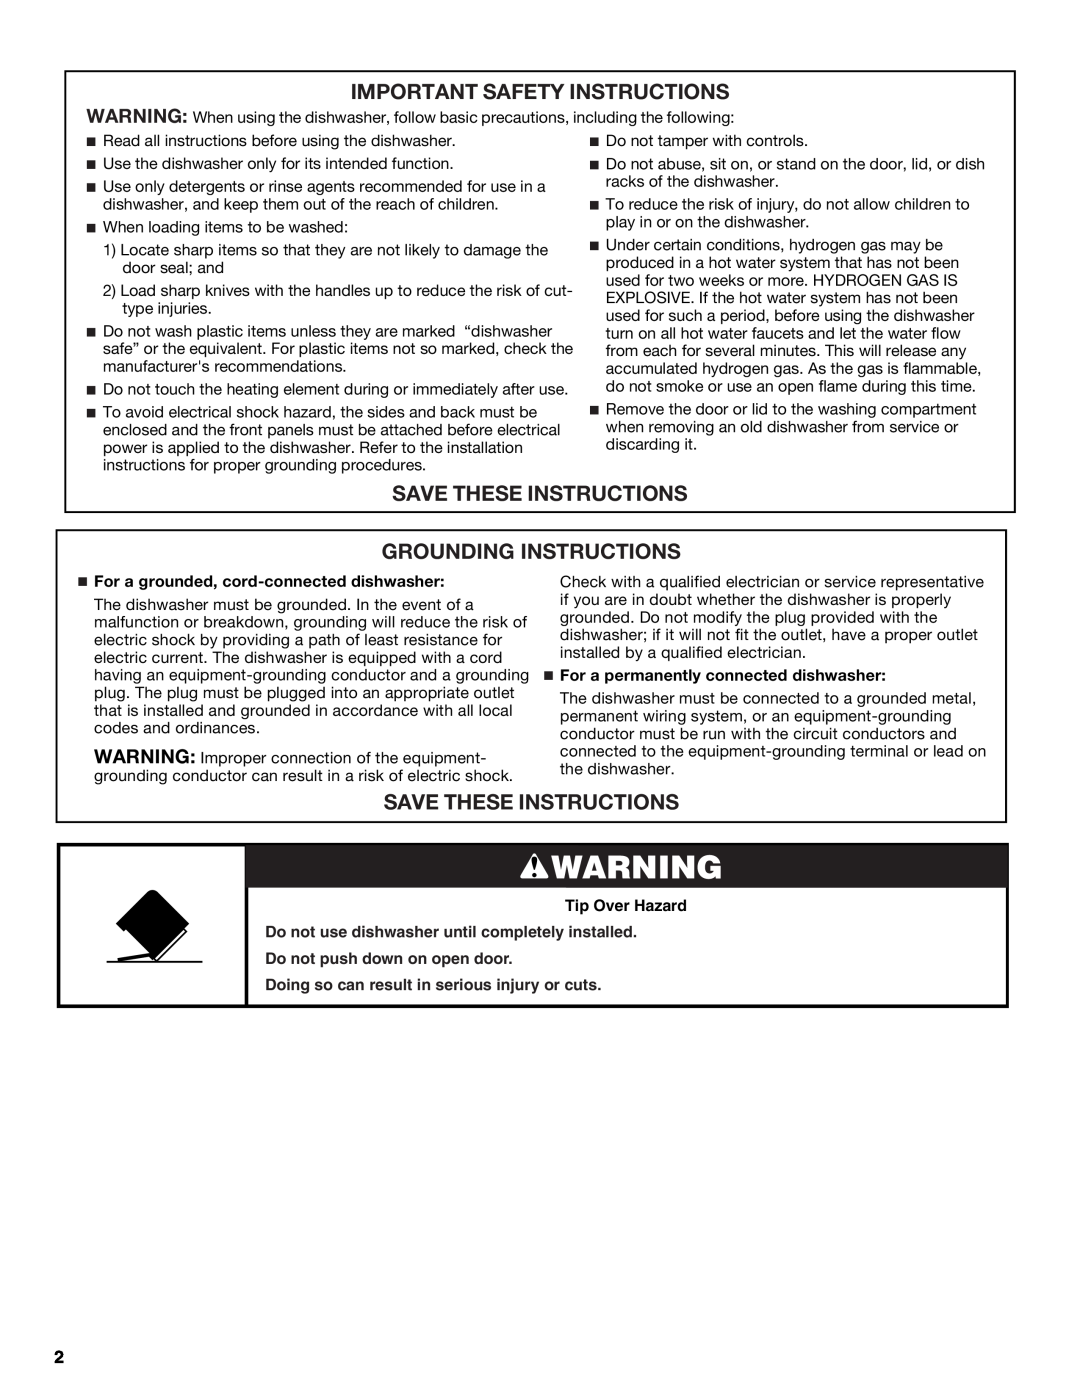 Maytag MDB7809AWM, W10255115A, W10255114A Important Safety Instructions, Save These Instructions Grounding Instructions 